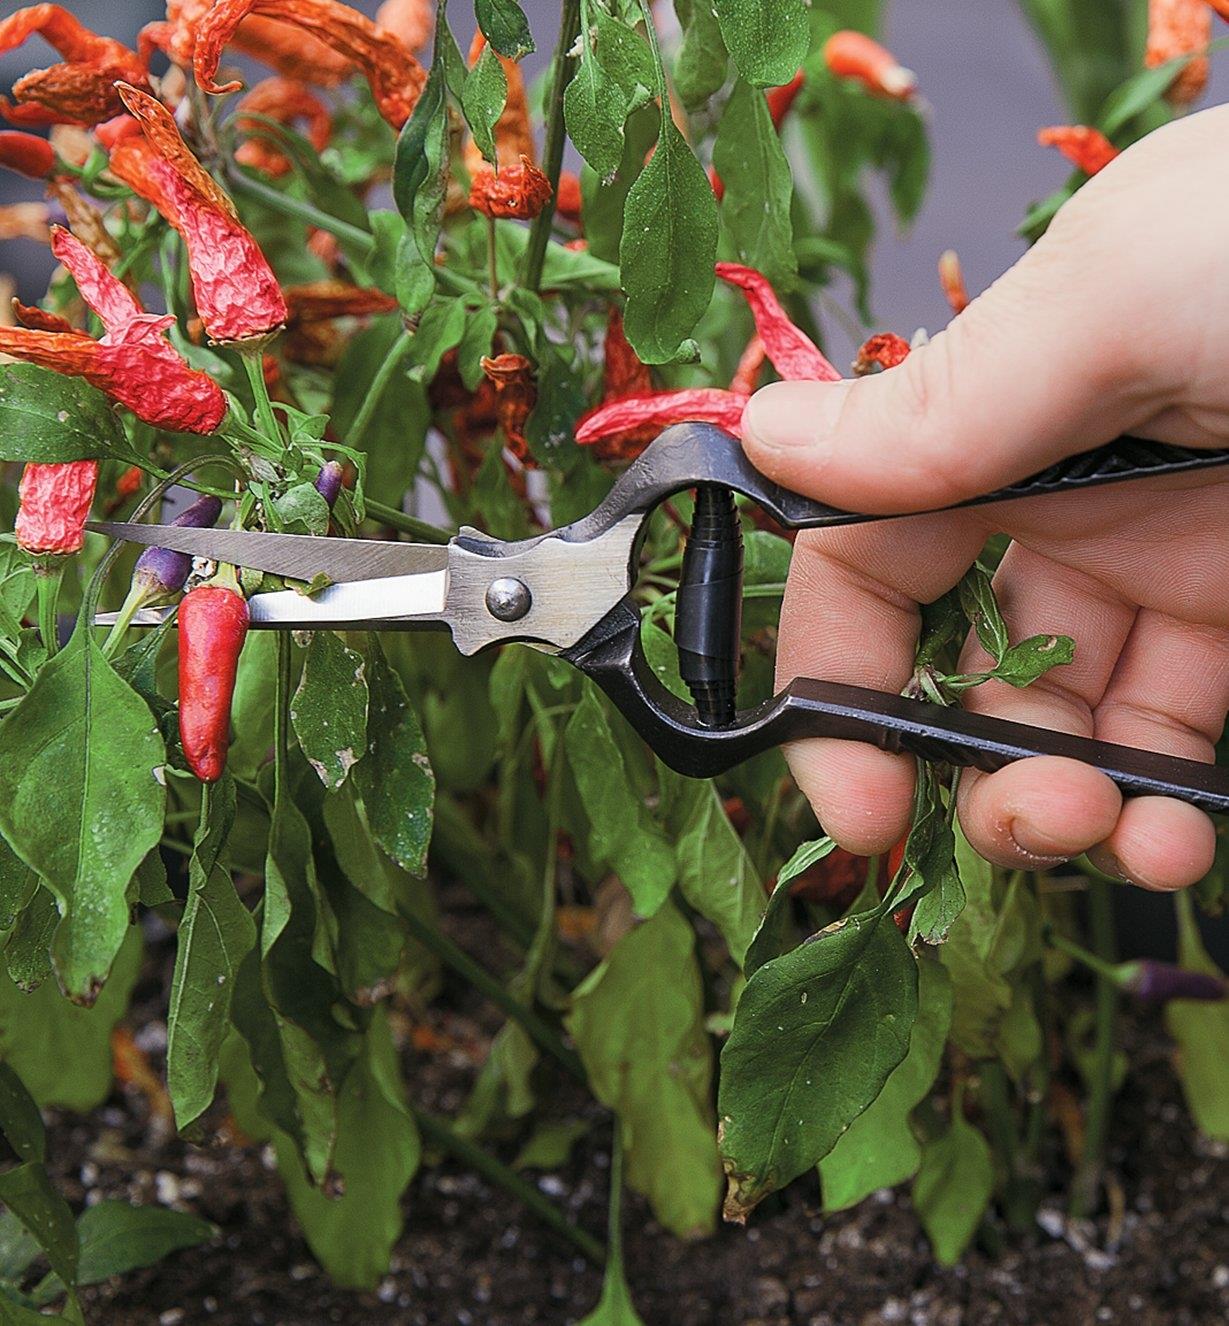 Harvesting peppers with Forged Flower Shears